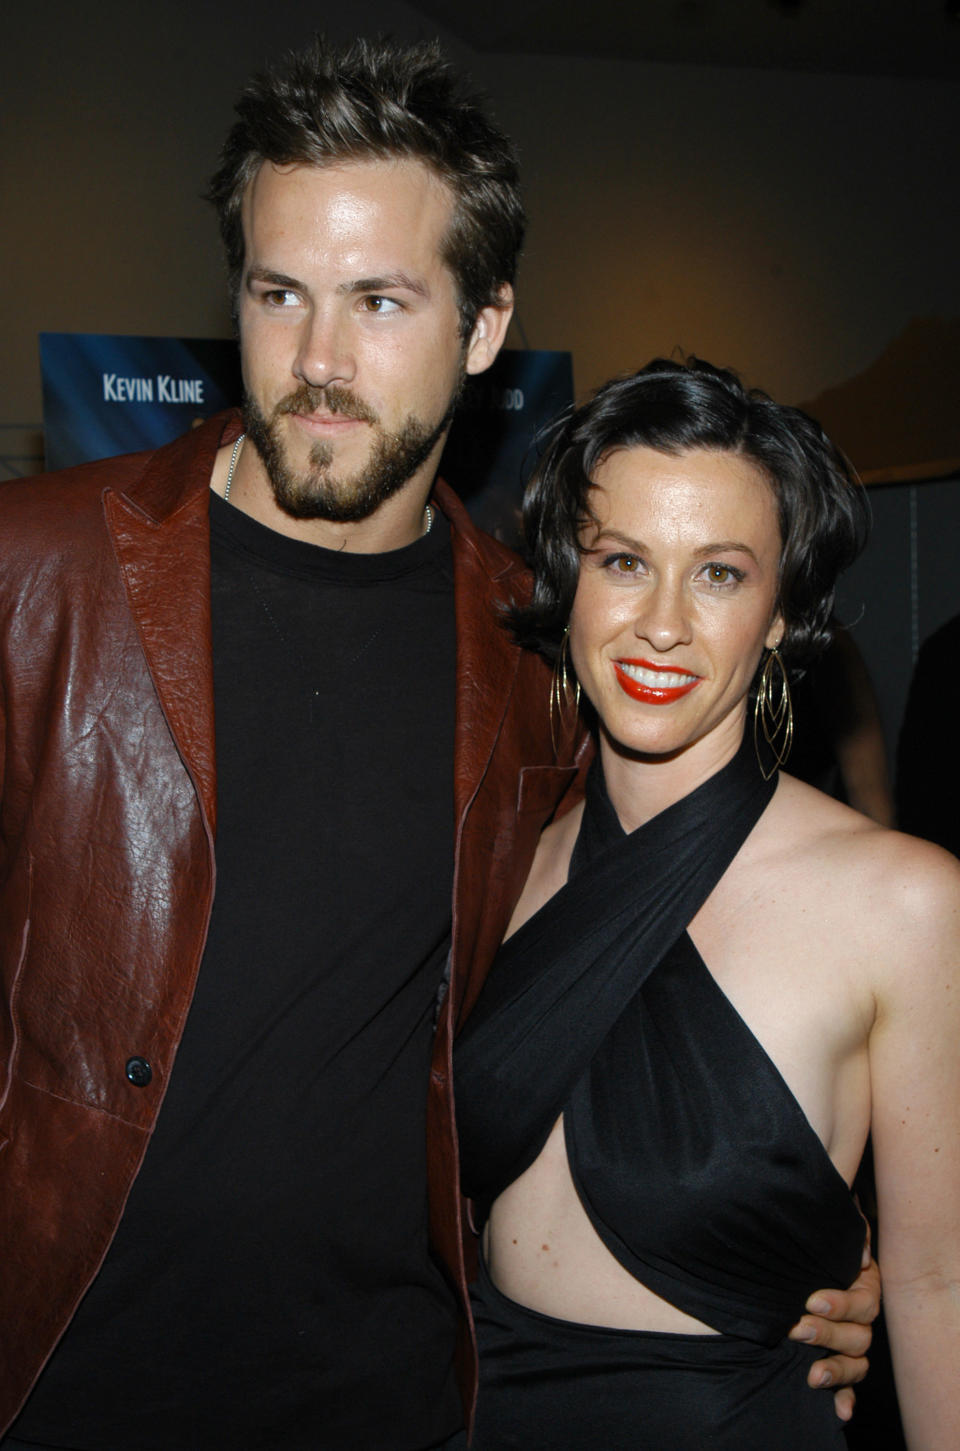 Ryan Reynolds wearing a leather jacket as he stands with his arm around Alanis Morissette, who's wearing a halter top at a premiere